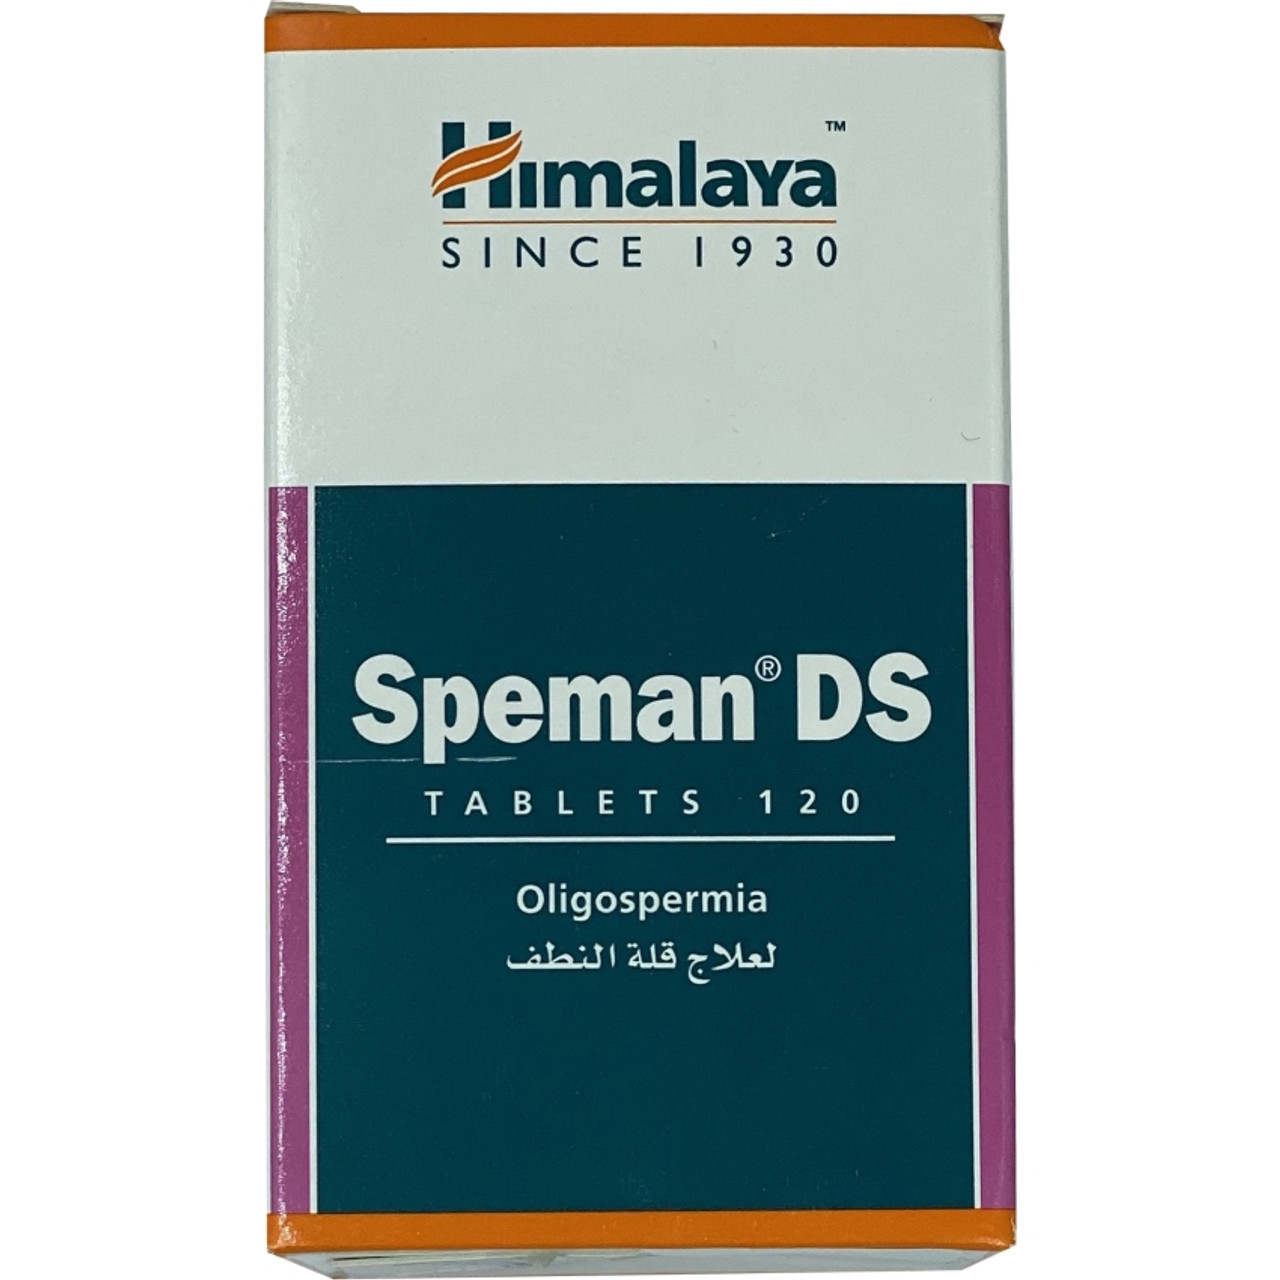 Buy Himalaya Speman DS Tabs 120s Online at Best Price & Same Day Delivery  at NextDoorMed